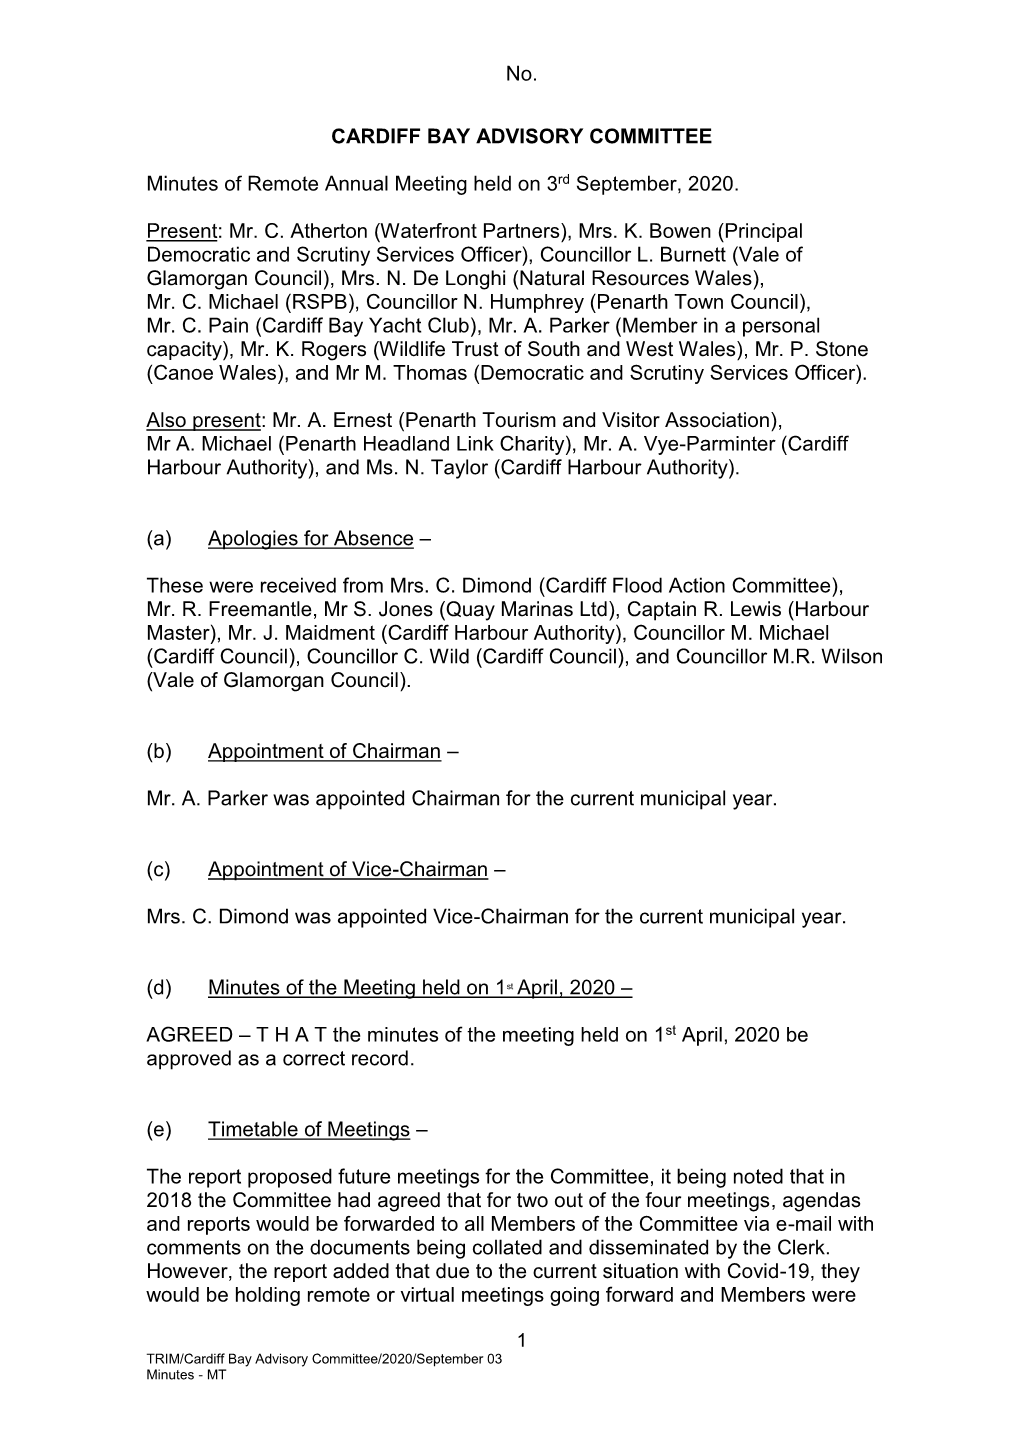 Cardiff Bay Advisory Committee Minutes